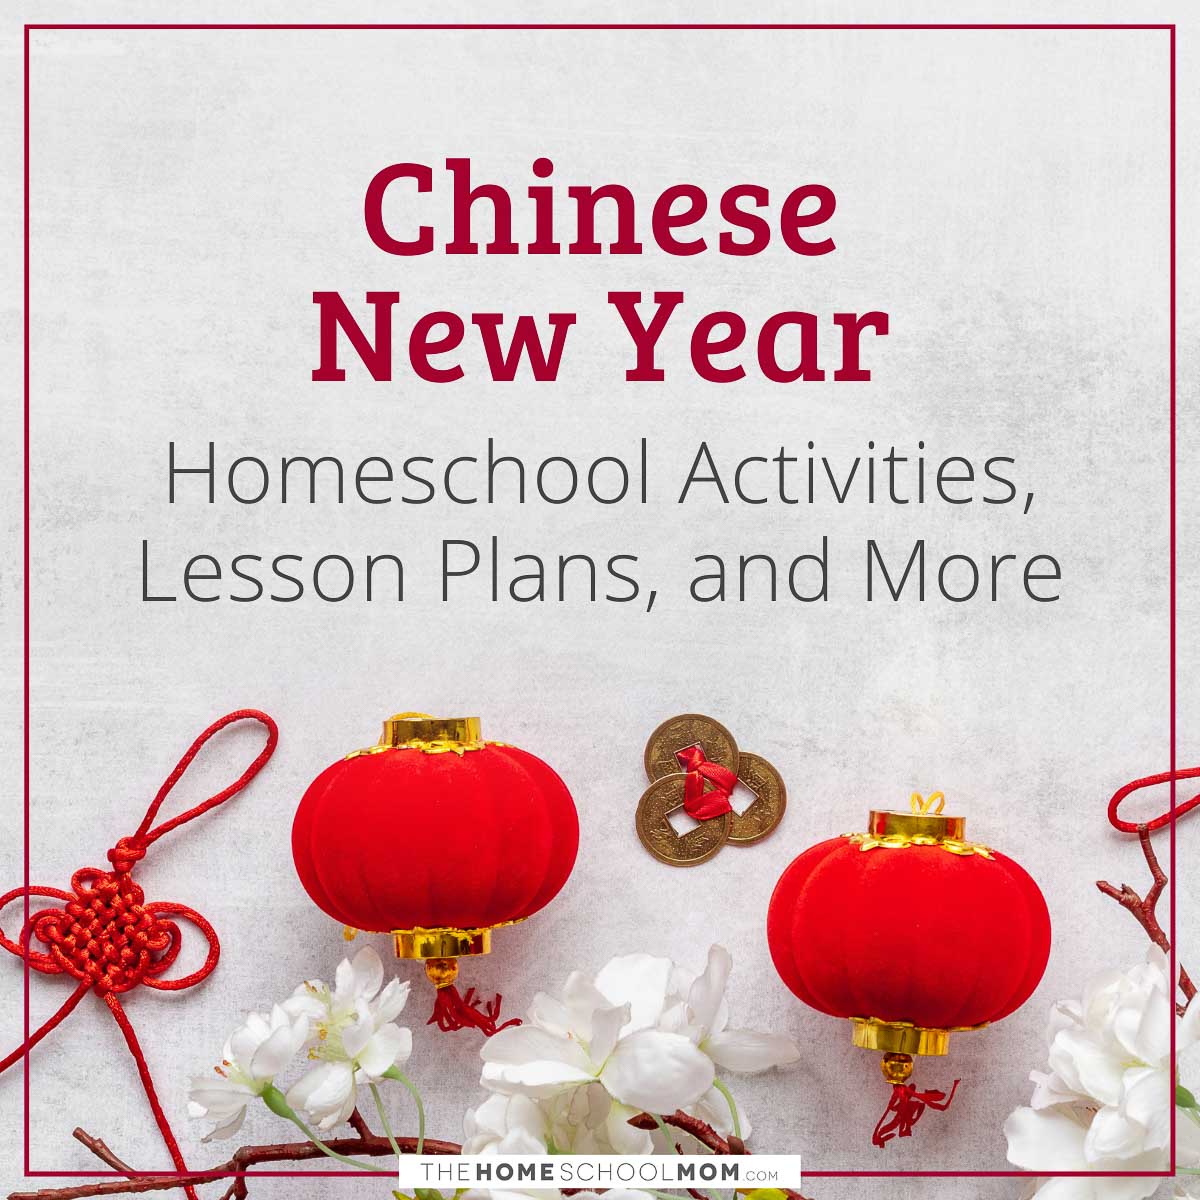 Chinese New Year Homeschool Activities, Lesson Plans, and More